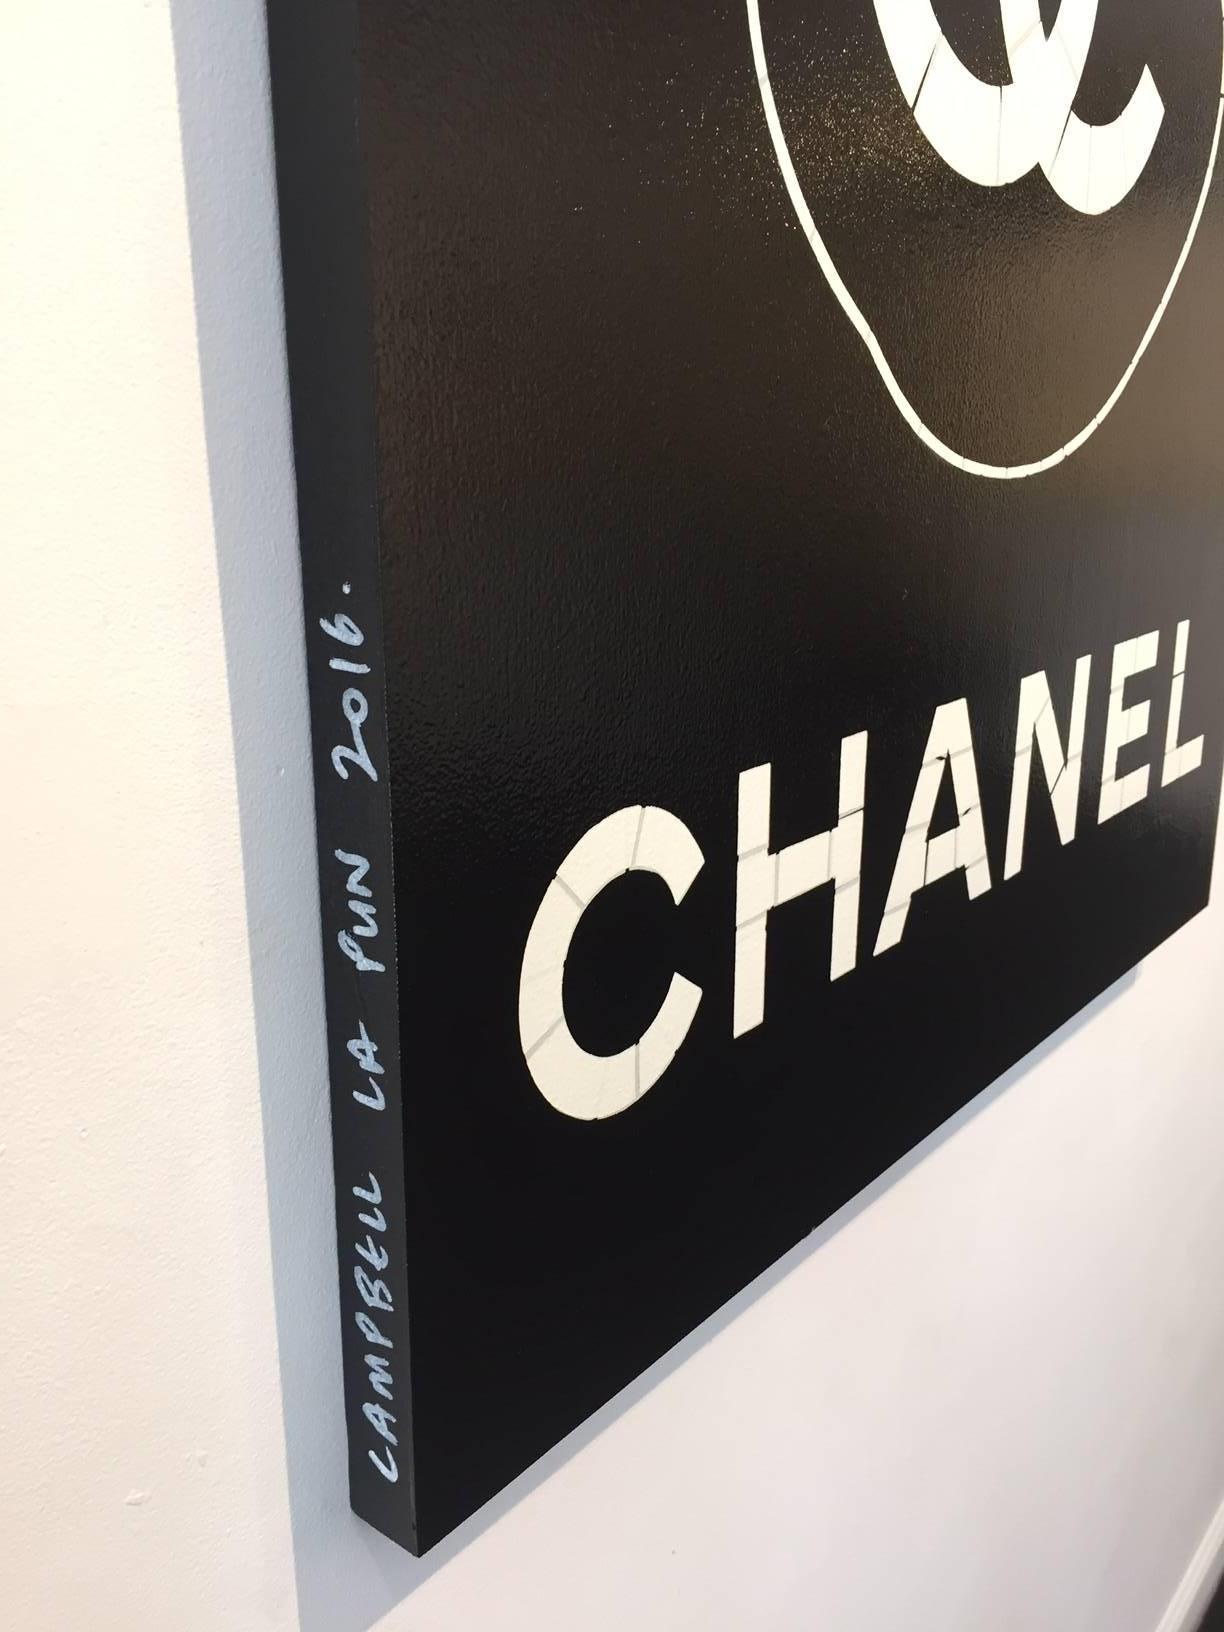 Mickey Chanel (black) - Painting by Campbell la Pun